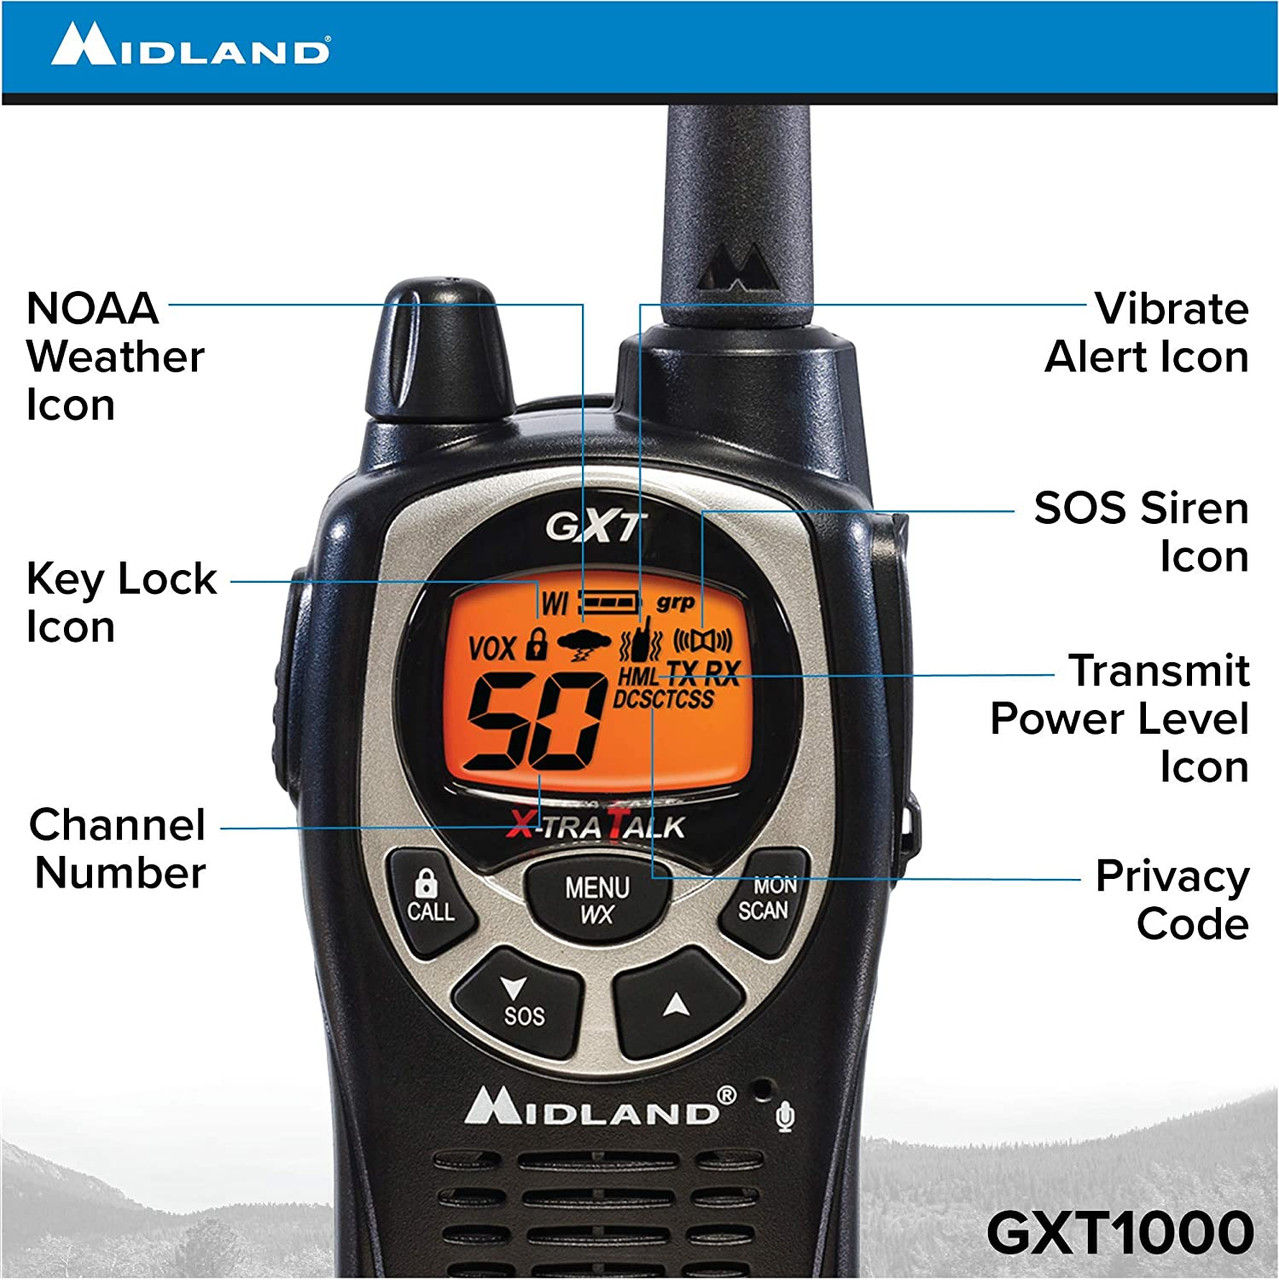 Midland GXT1000VP4 - 50 Channel GMRS Two-Way Radio - Long Range Walkie  Talkie with 142 Privacy Codes, SOS Siren, and NOAA Weather Alerts and  Weather